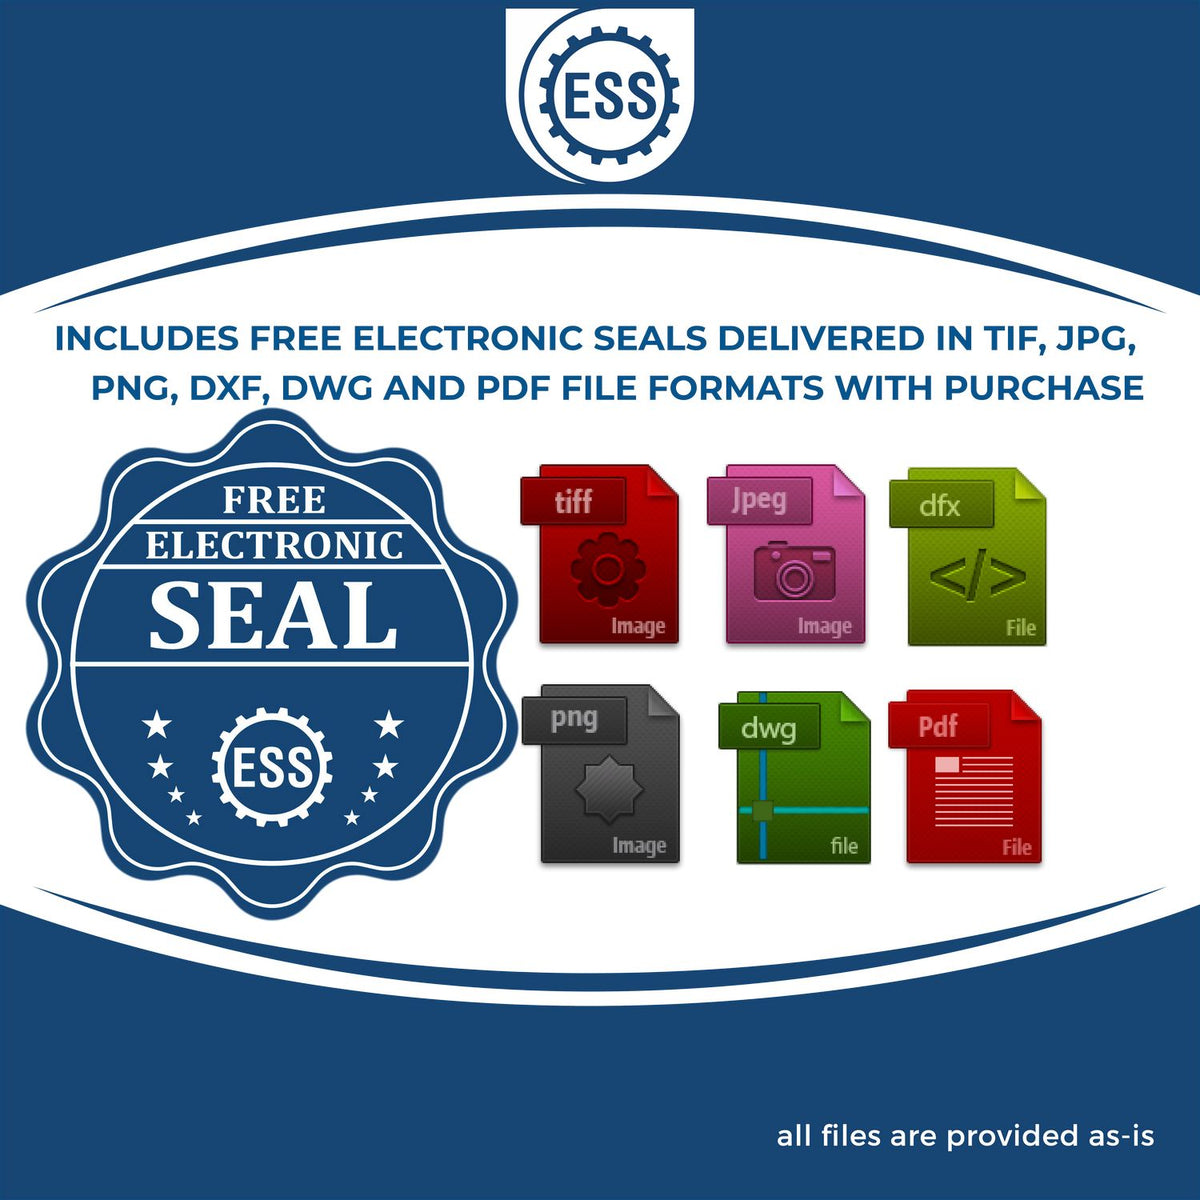 An infographic for the free electronic seal for the State of Indiana Extended Long Reach Geologist Seal illustrating the different file type icons such as DXF, DWG, TIF, JPG and PNG.